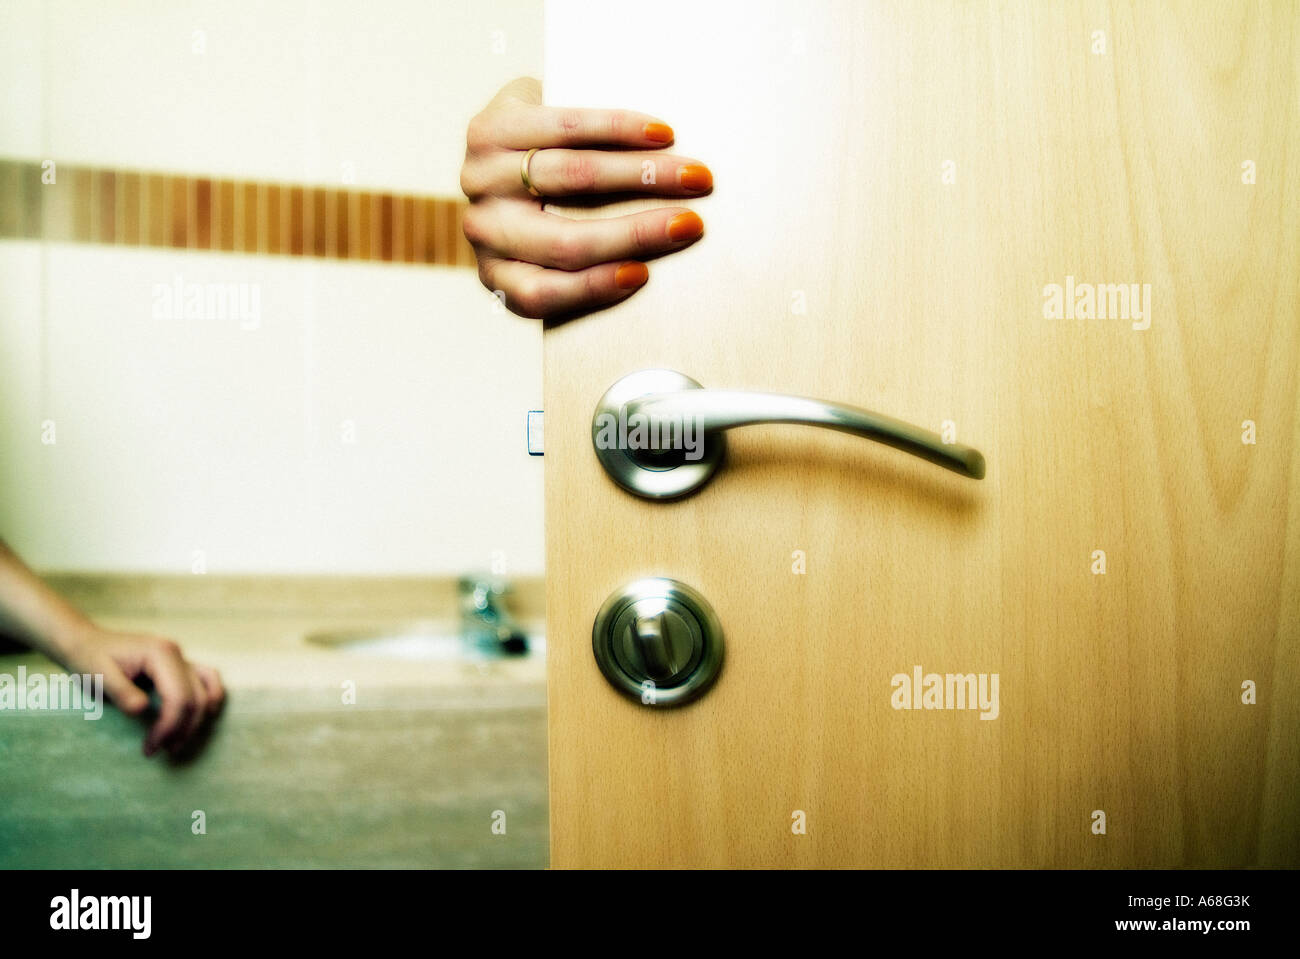 Hand opening a bathroom's door and someone waiting inside Stock Photo